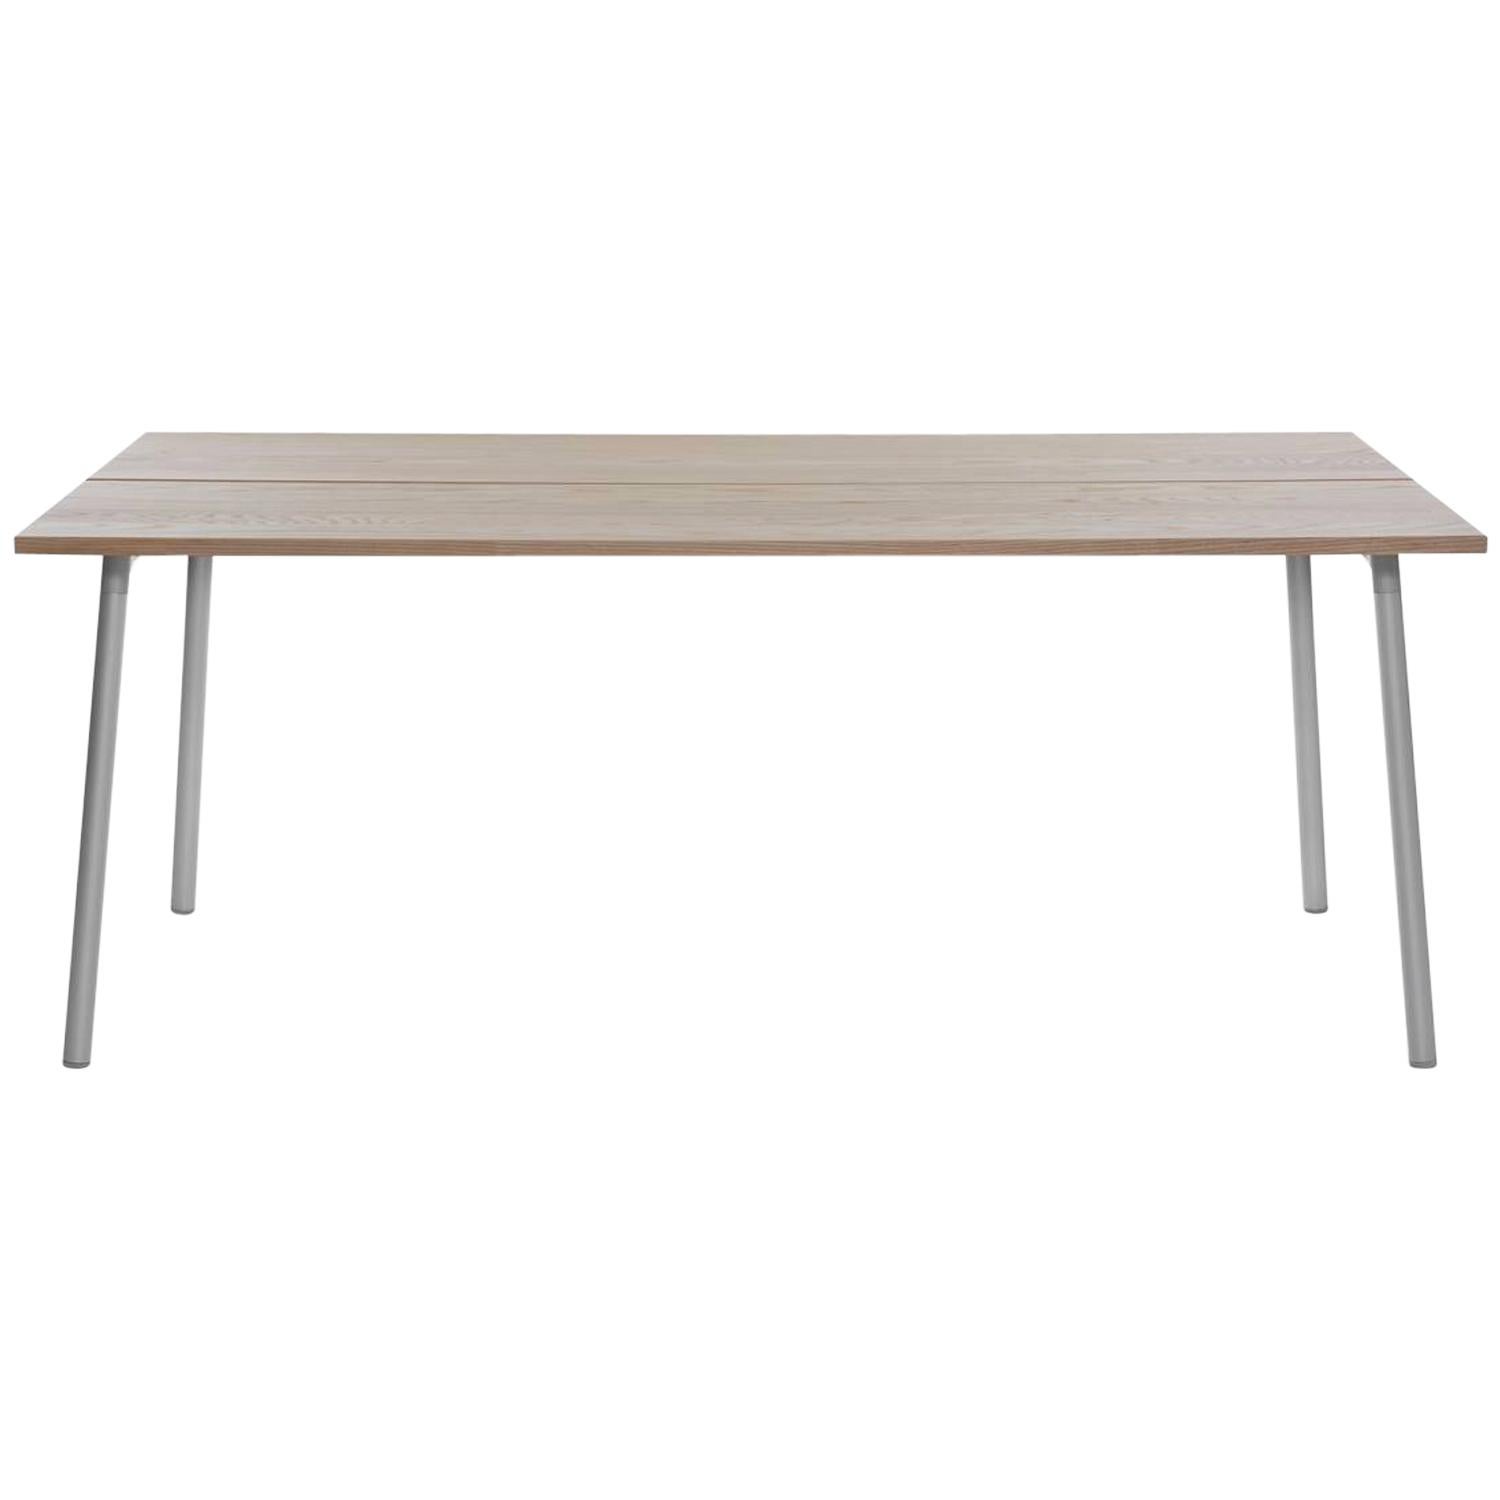 Emeco Run Large Table in Aluminum and Ash by Sam Hecht and Kim Colin